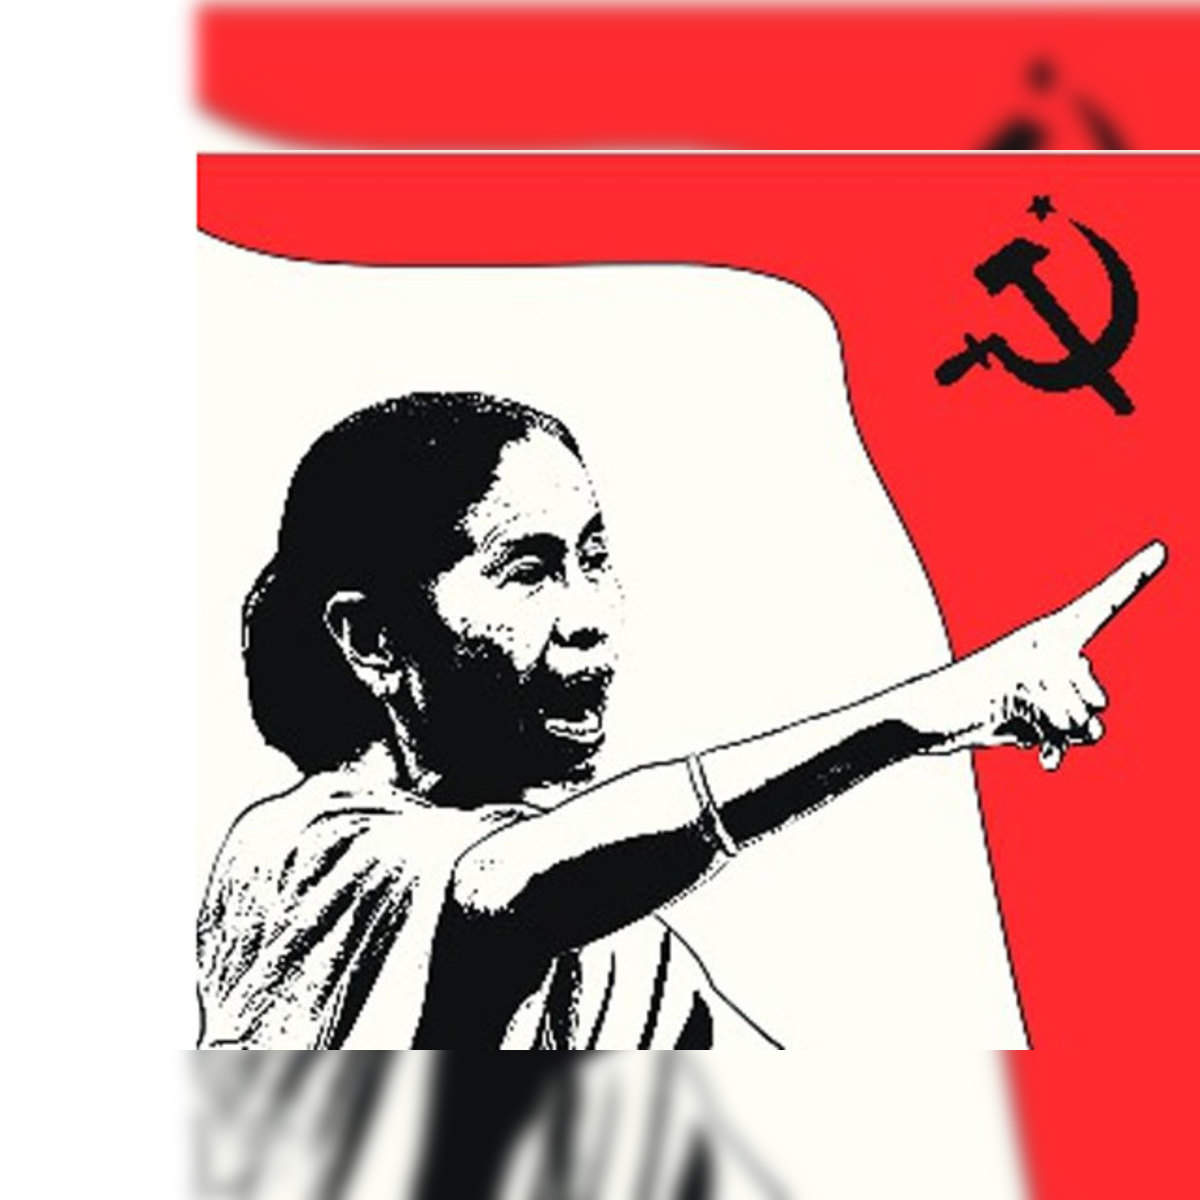 CITU condemns police atrocity on Plantation Leaders in West Bengal - WFTU